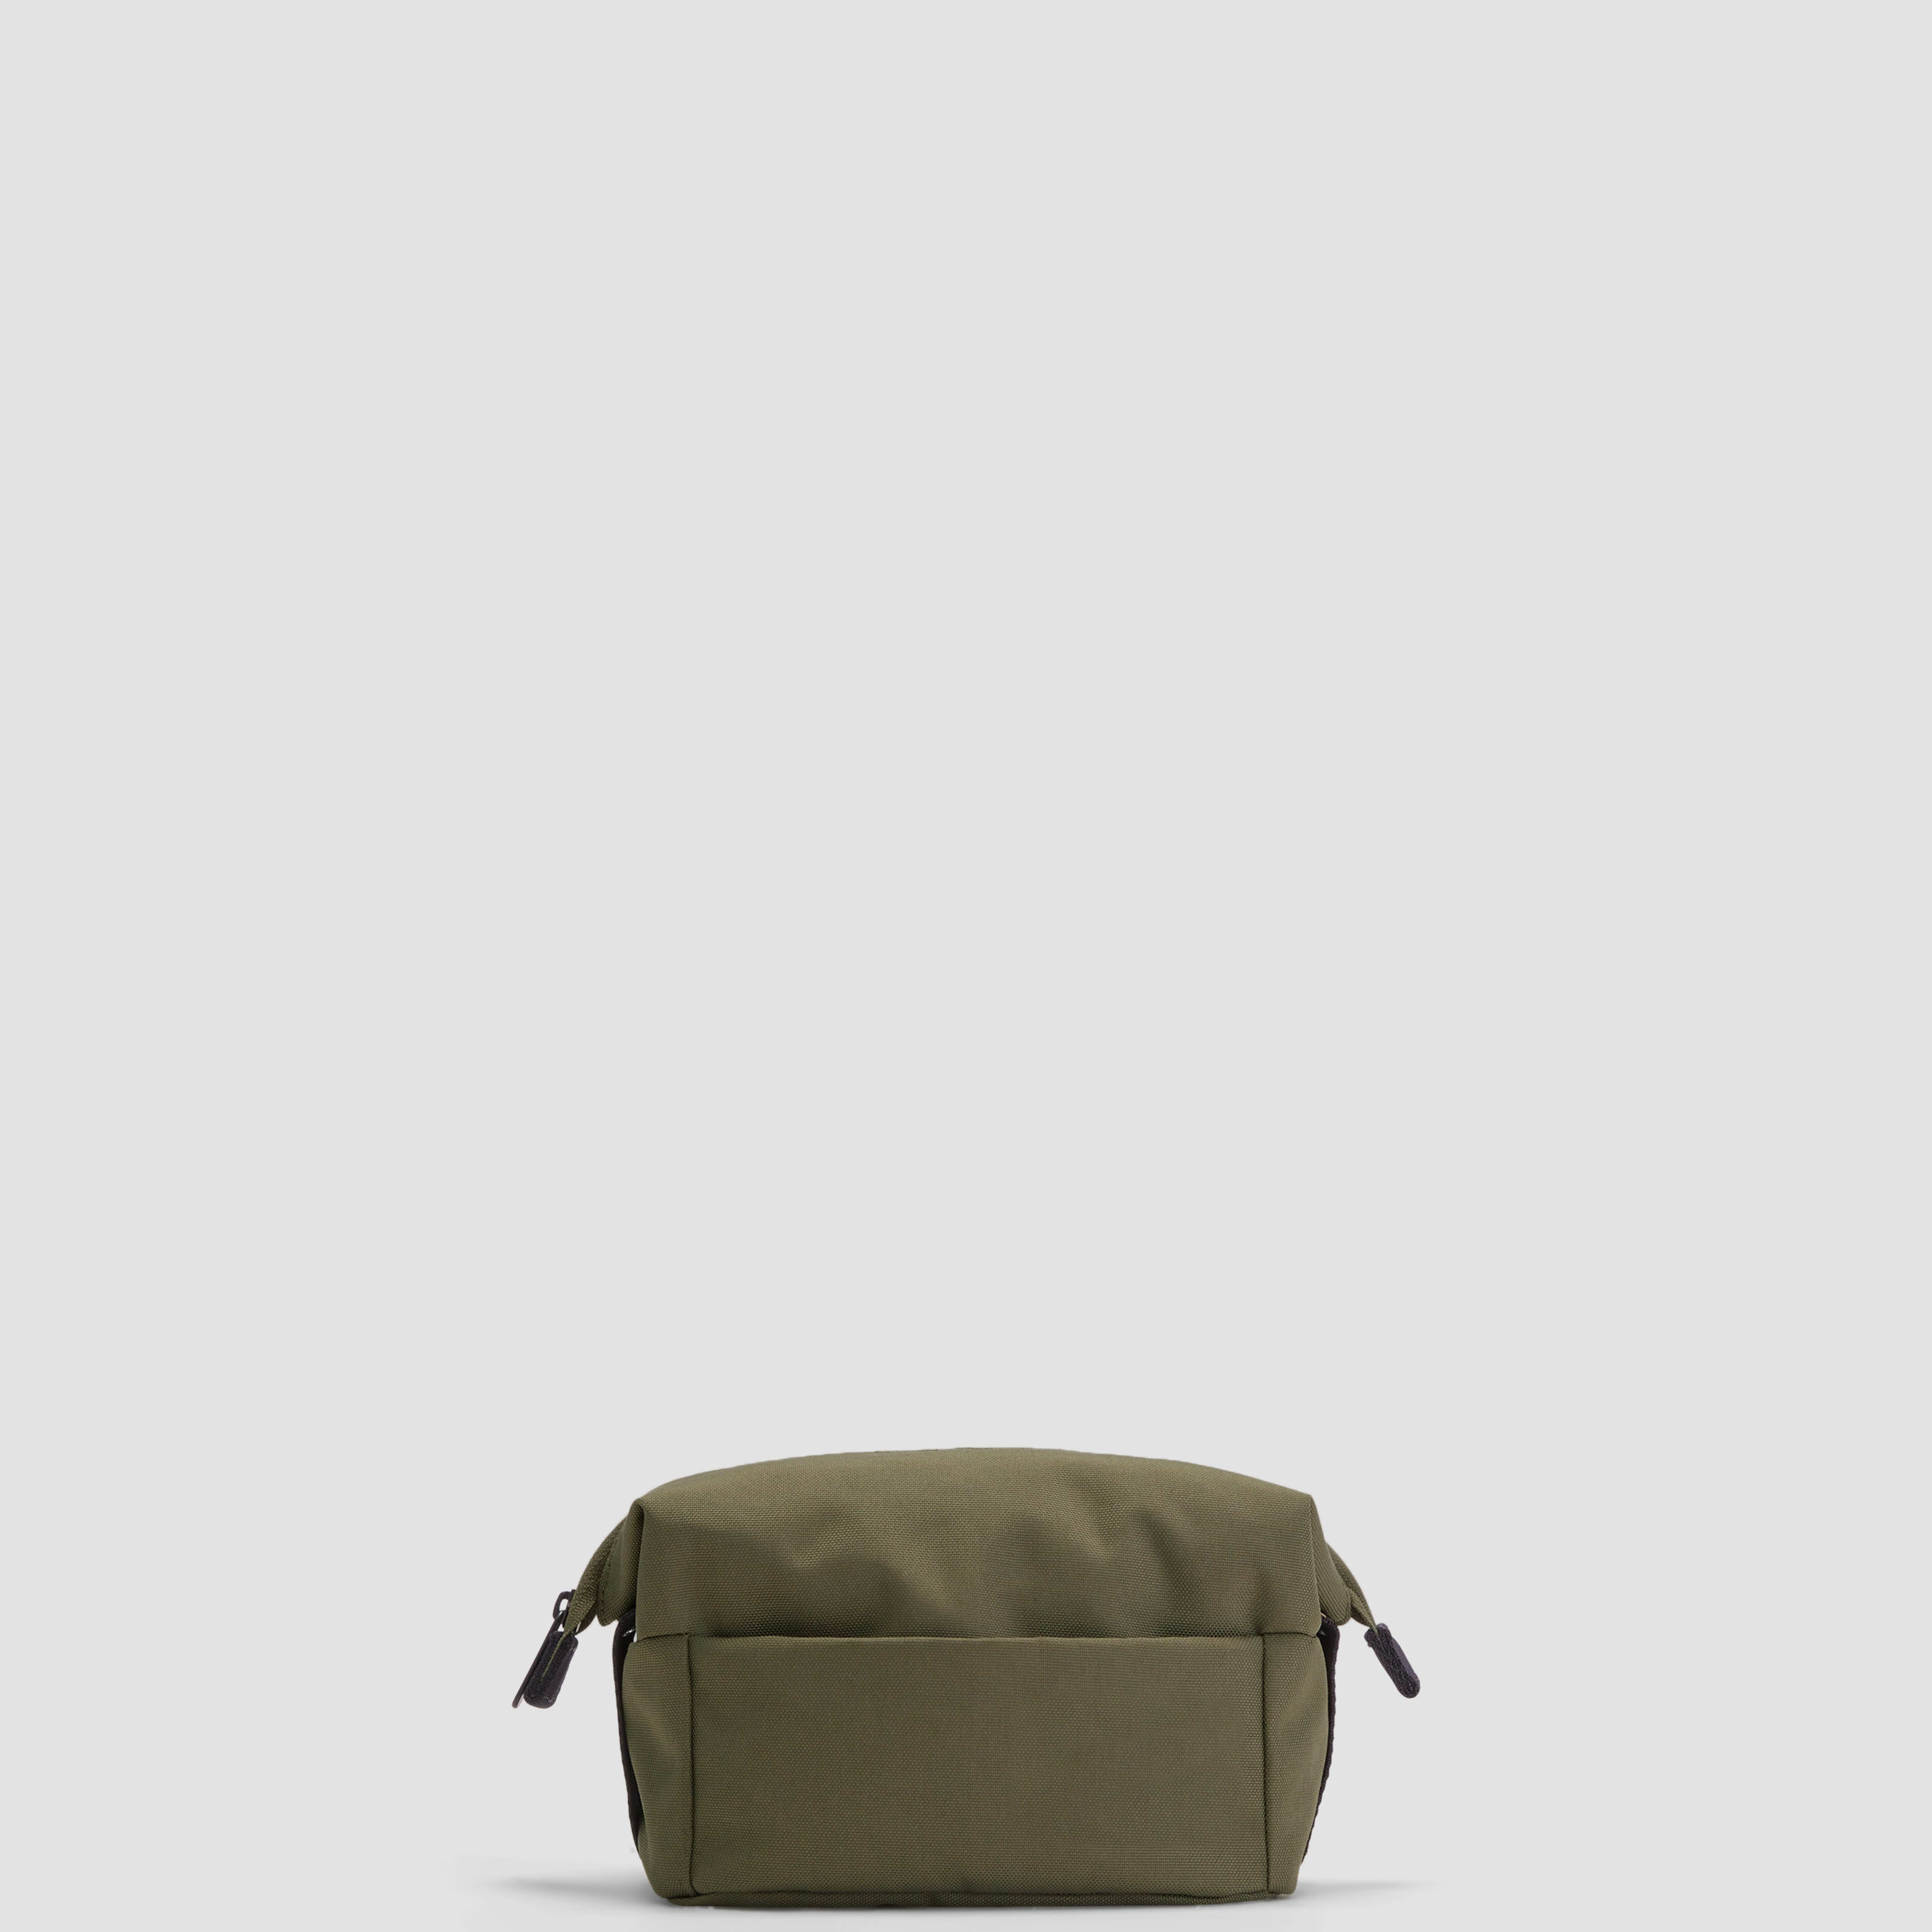 ReNew Transit Catch-All Case by Everlane in Olive